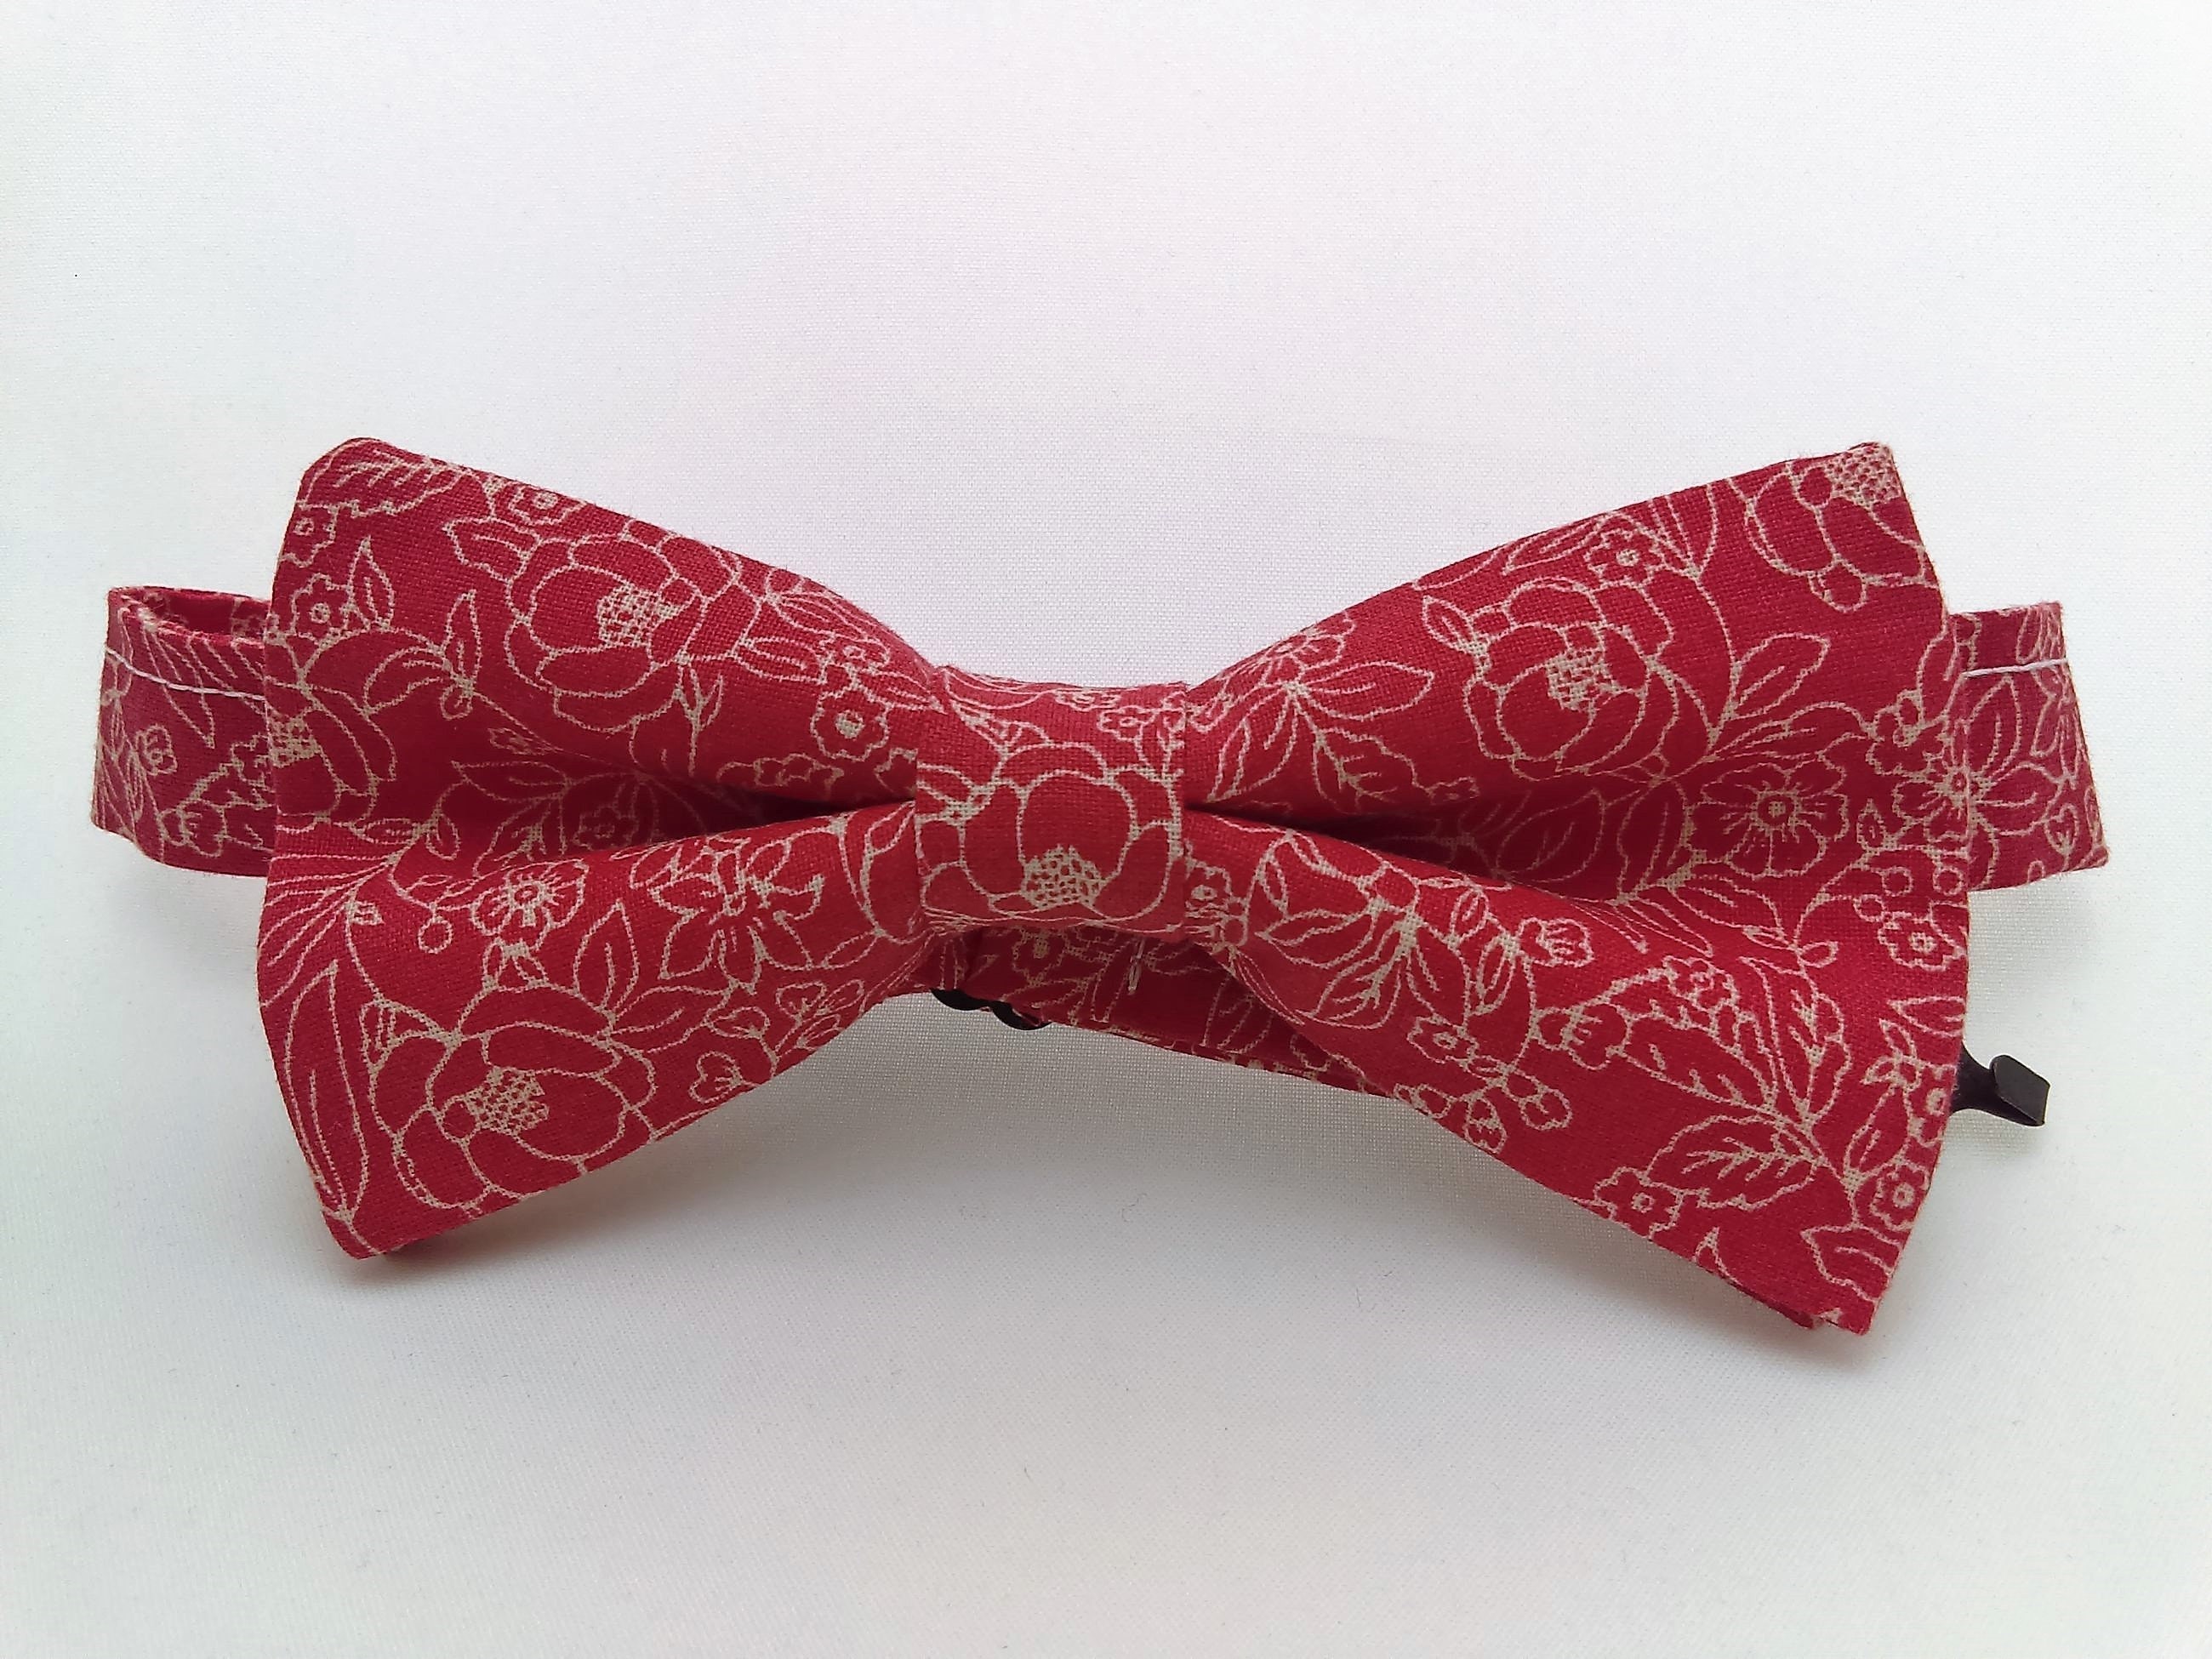 Red Bow Tie for Men,red Tie,gift for Men's,bowtie Boys,wedding